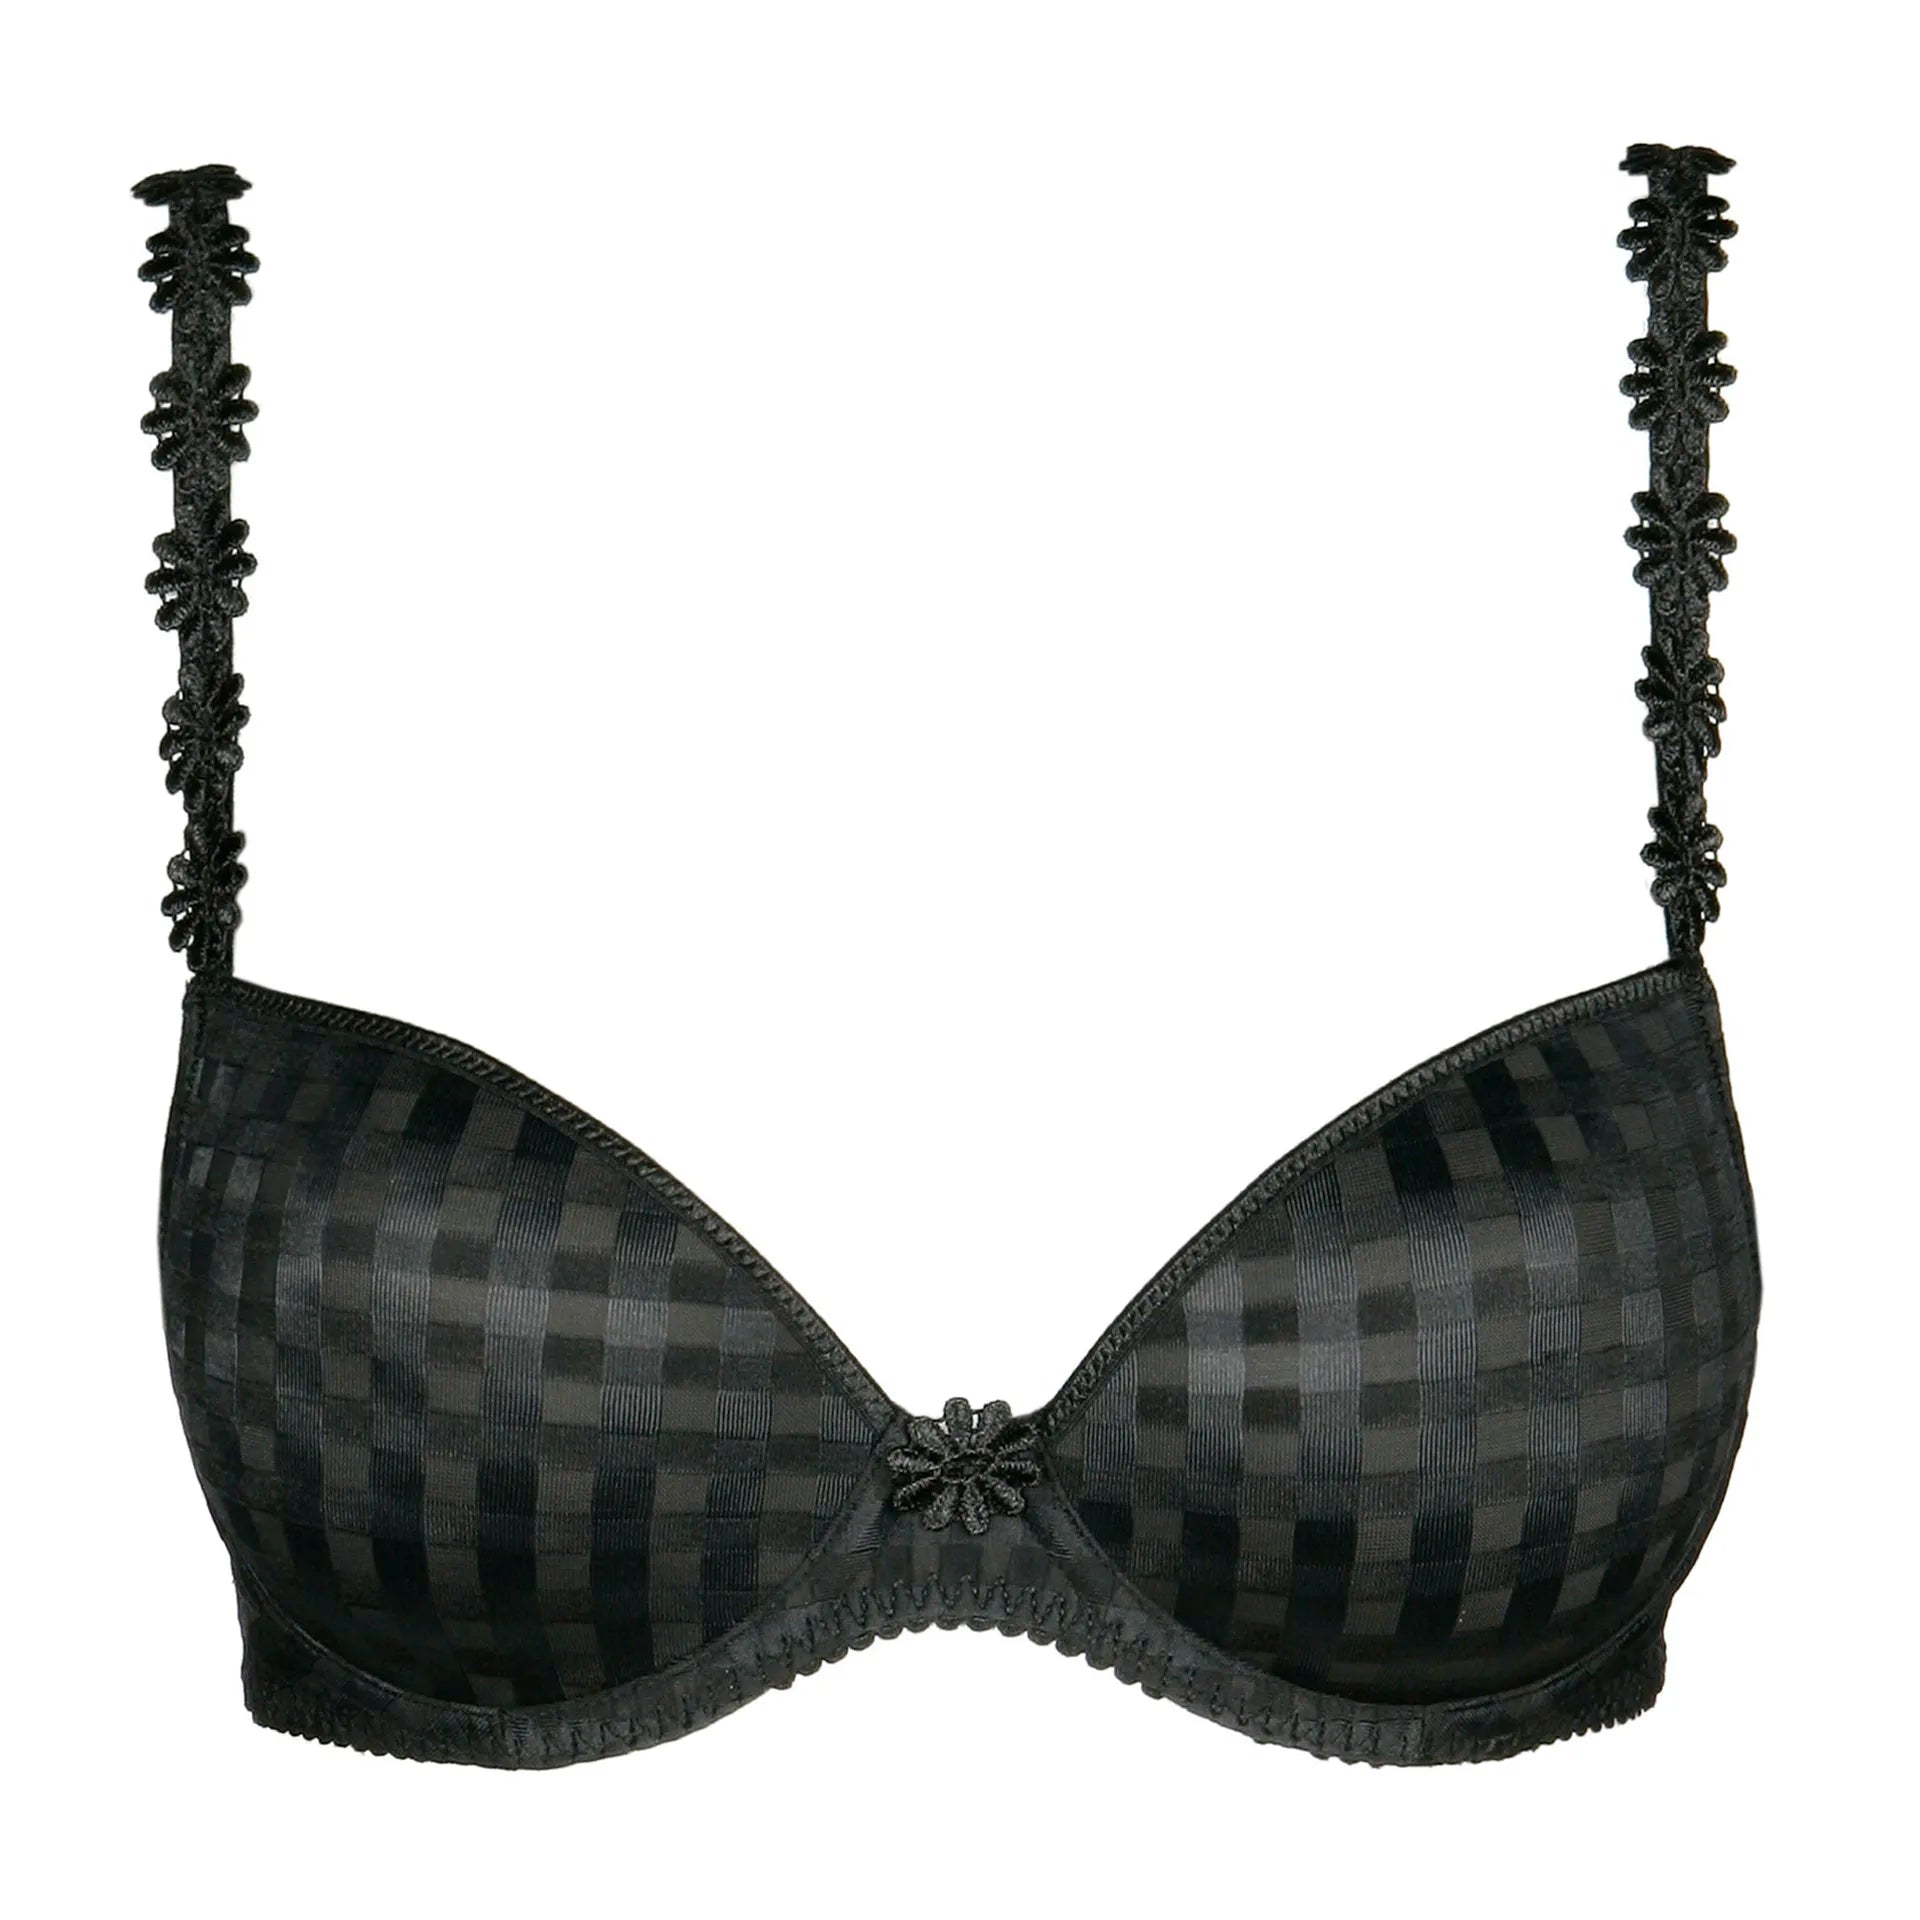 Avero Bra by Marie Jo front product image.